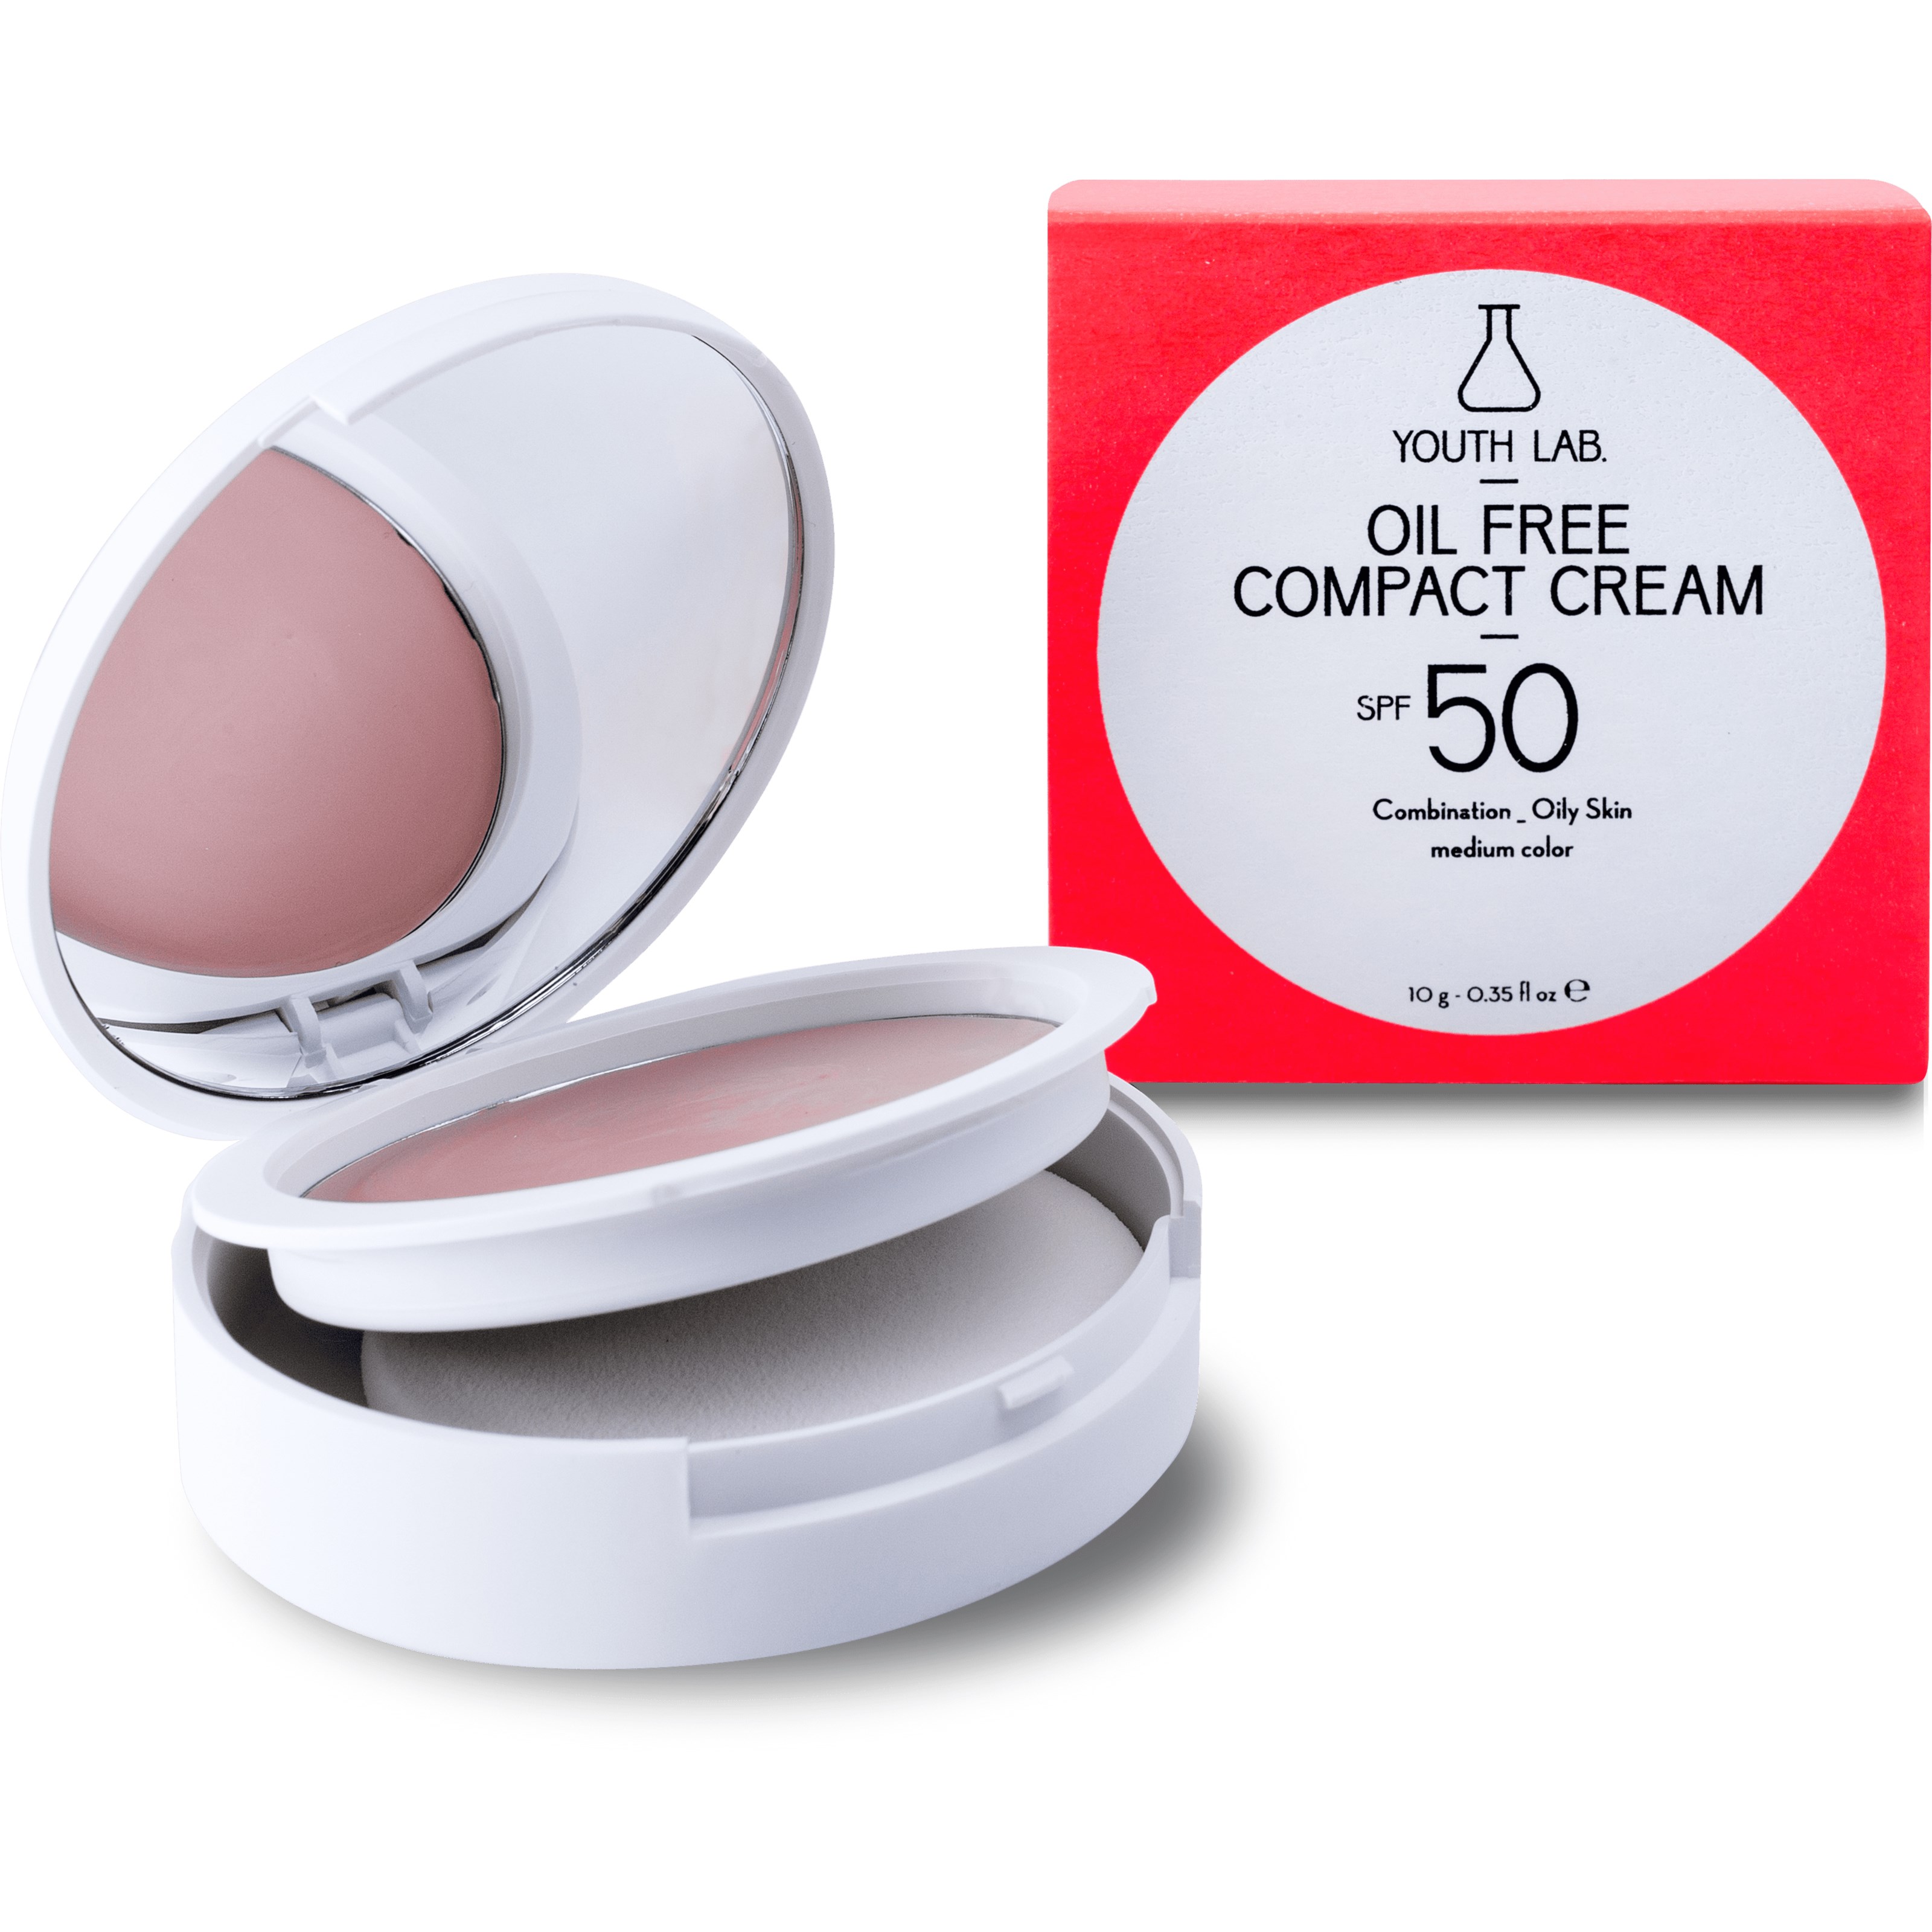 Youth Lab Oil Free Compact Cream Spf 50 Mediumcolor